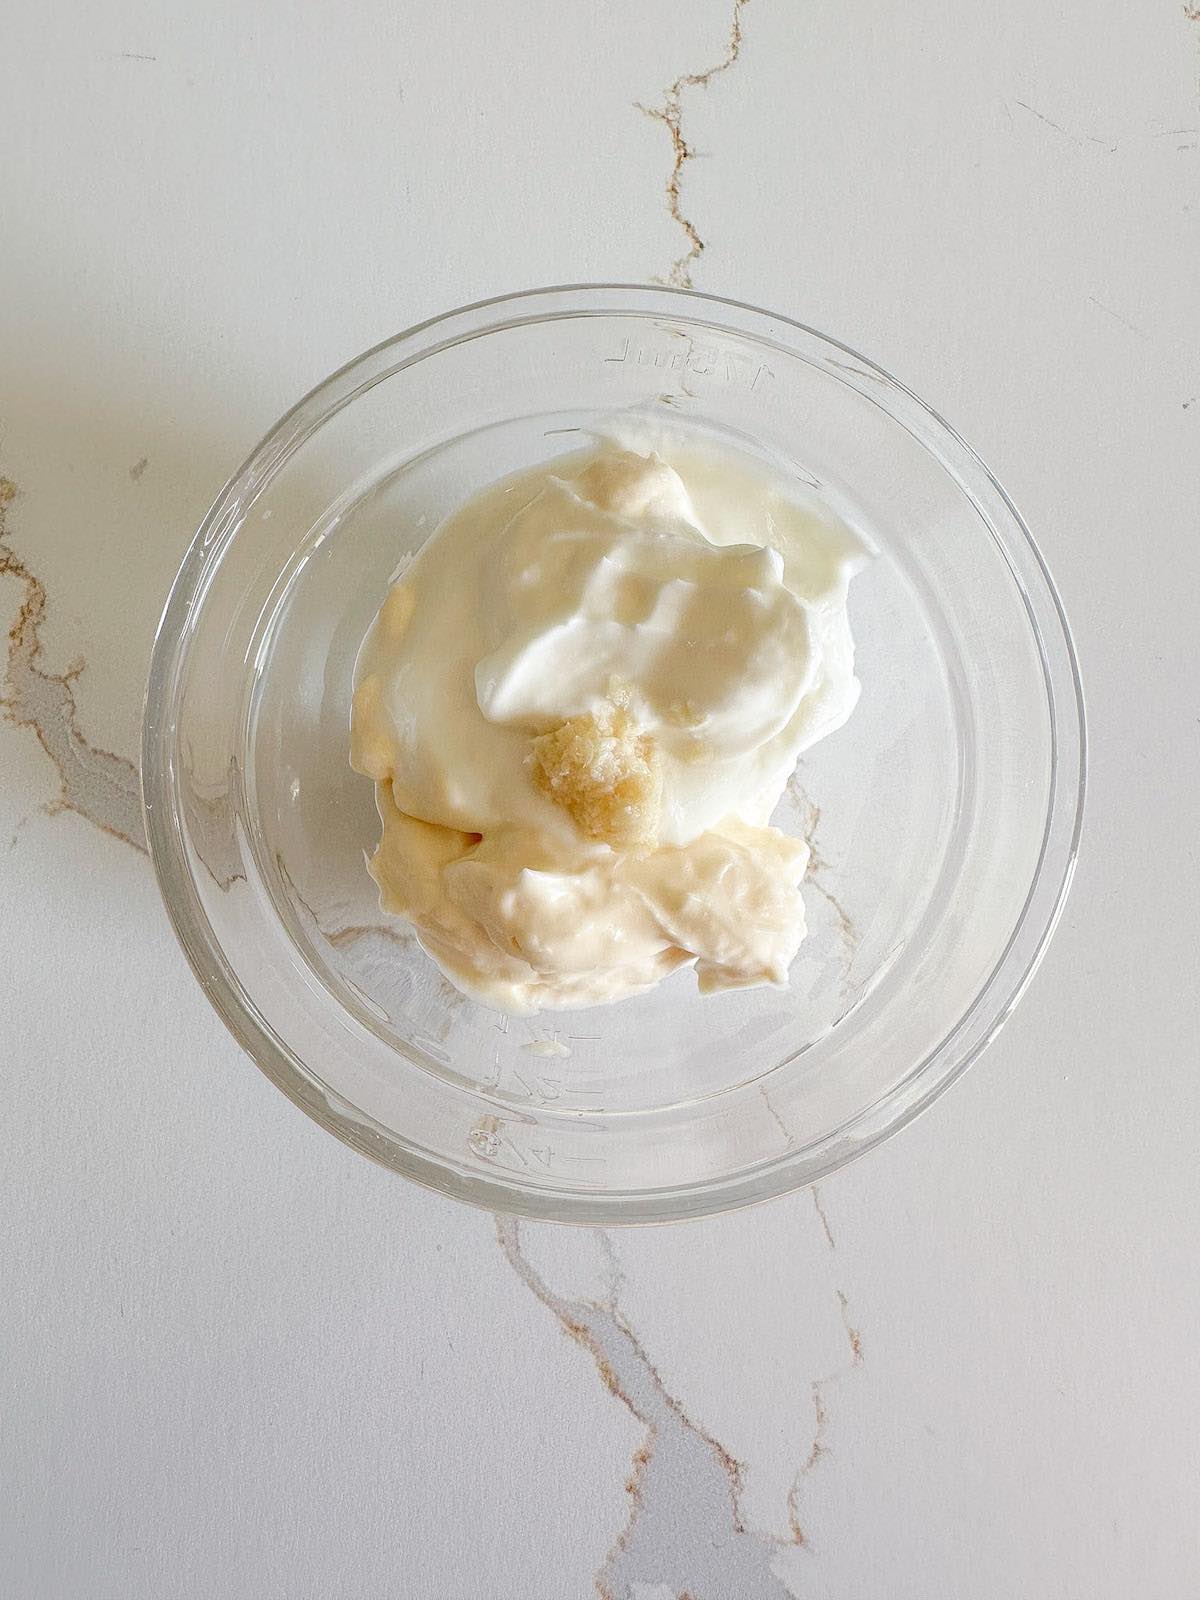 Making the creamy horseradish sauce in a small bowl.